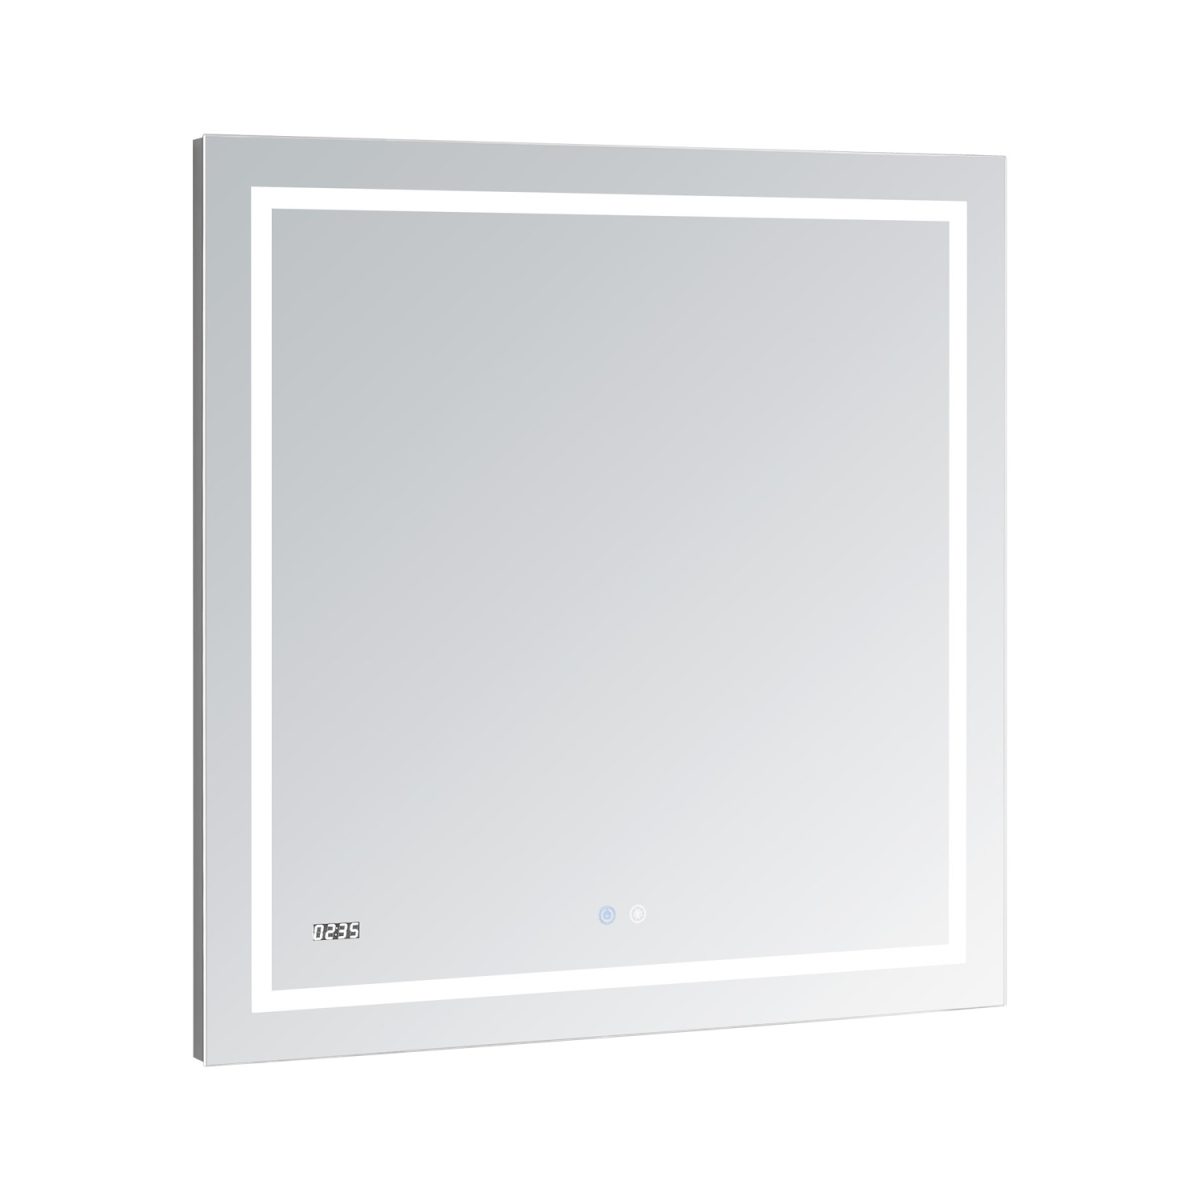 AQUADOM Daytona 36 inches x 36 inches Wall Mounted LED Lighted Silver Mirror for Bathroom